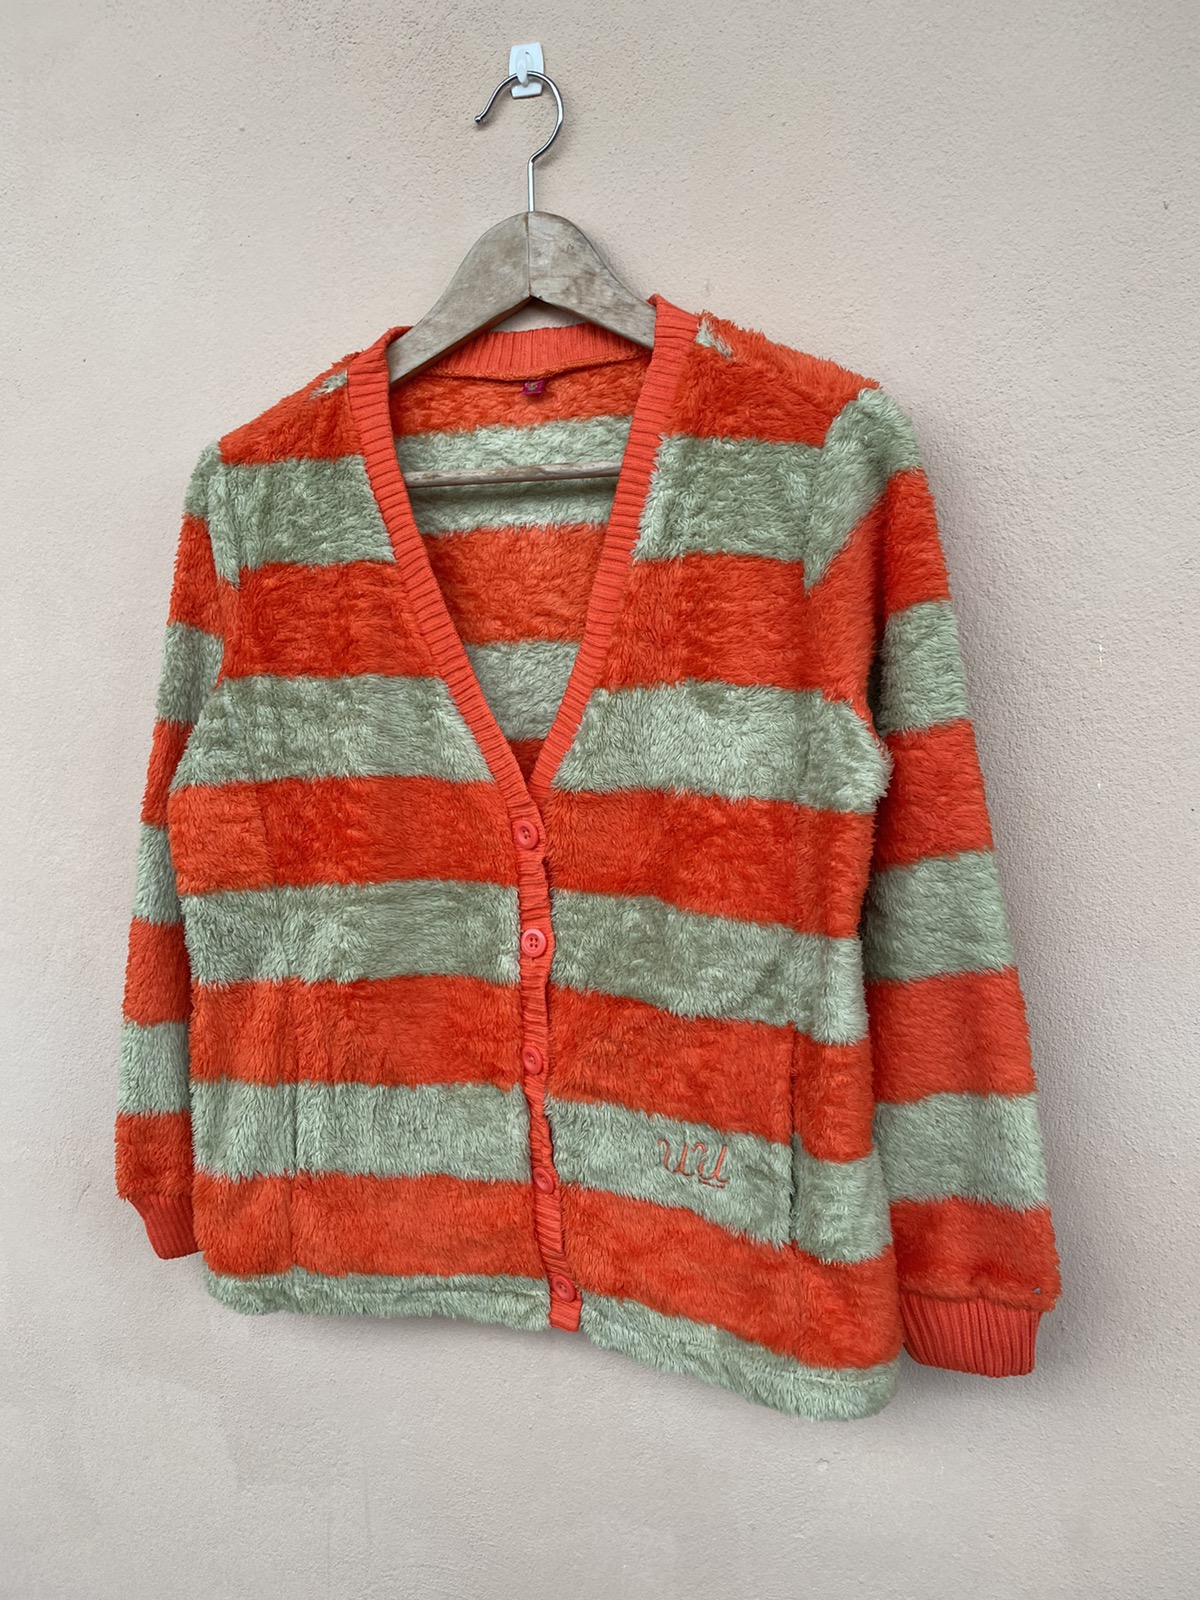 Cardigan Stripped Uniqlo X Undercover Very Nice Colour - 2